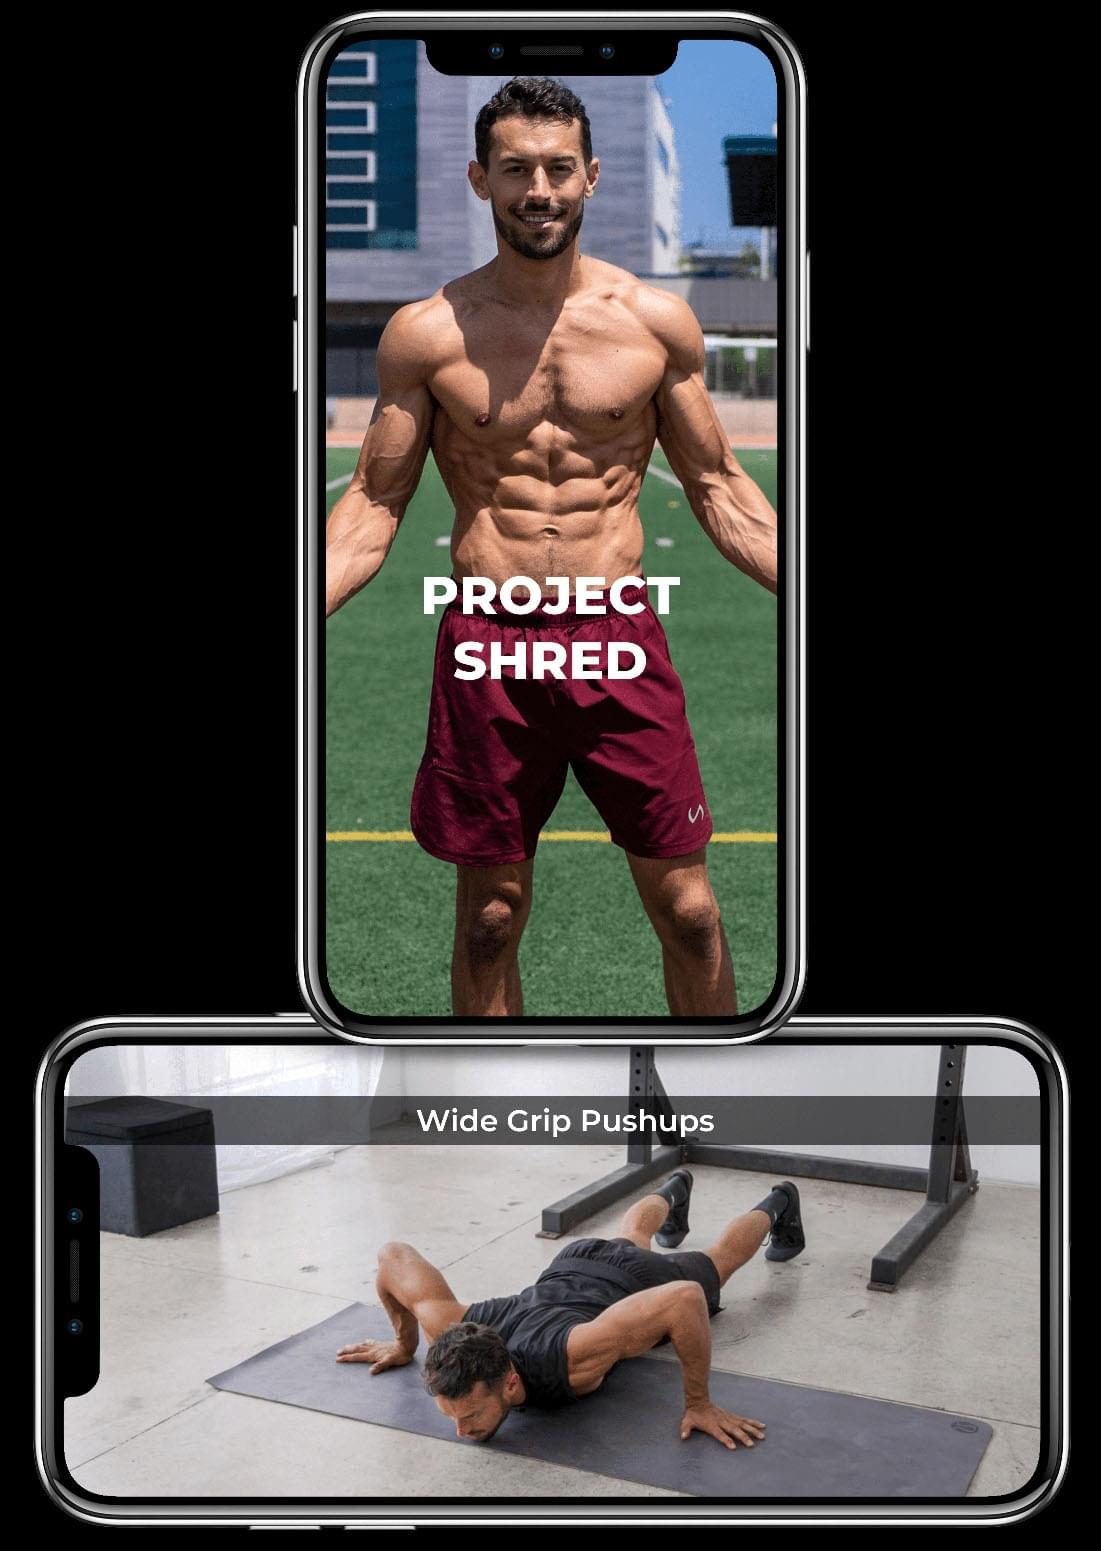 Project Shred By Adam Frater - Free Download Course Abs Program - Shredded Academy